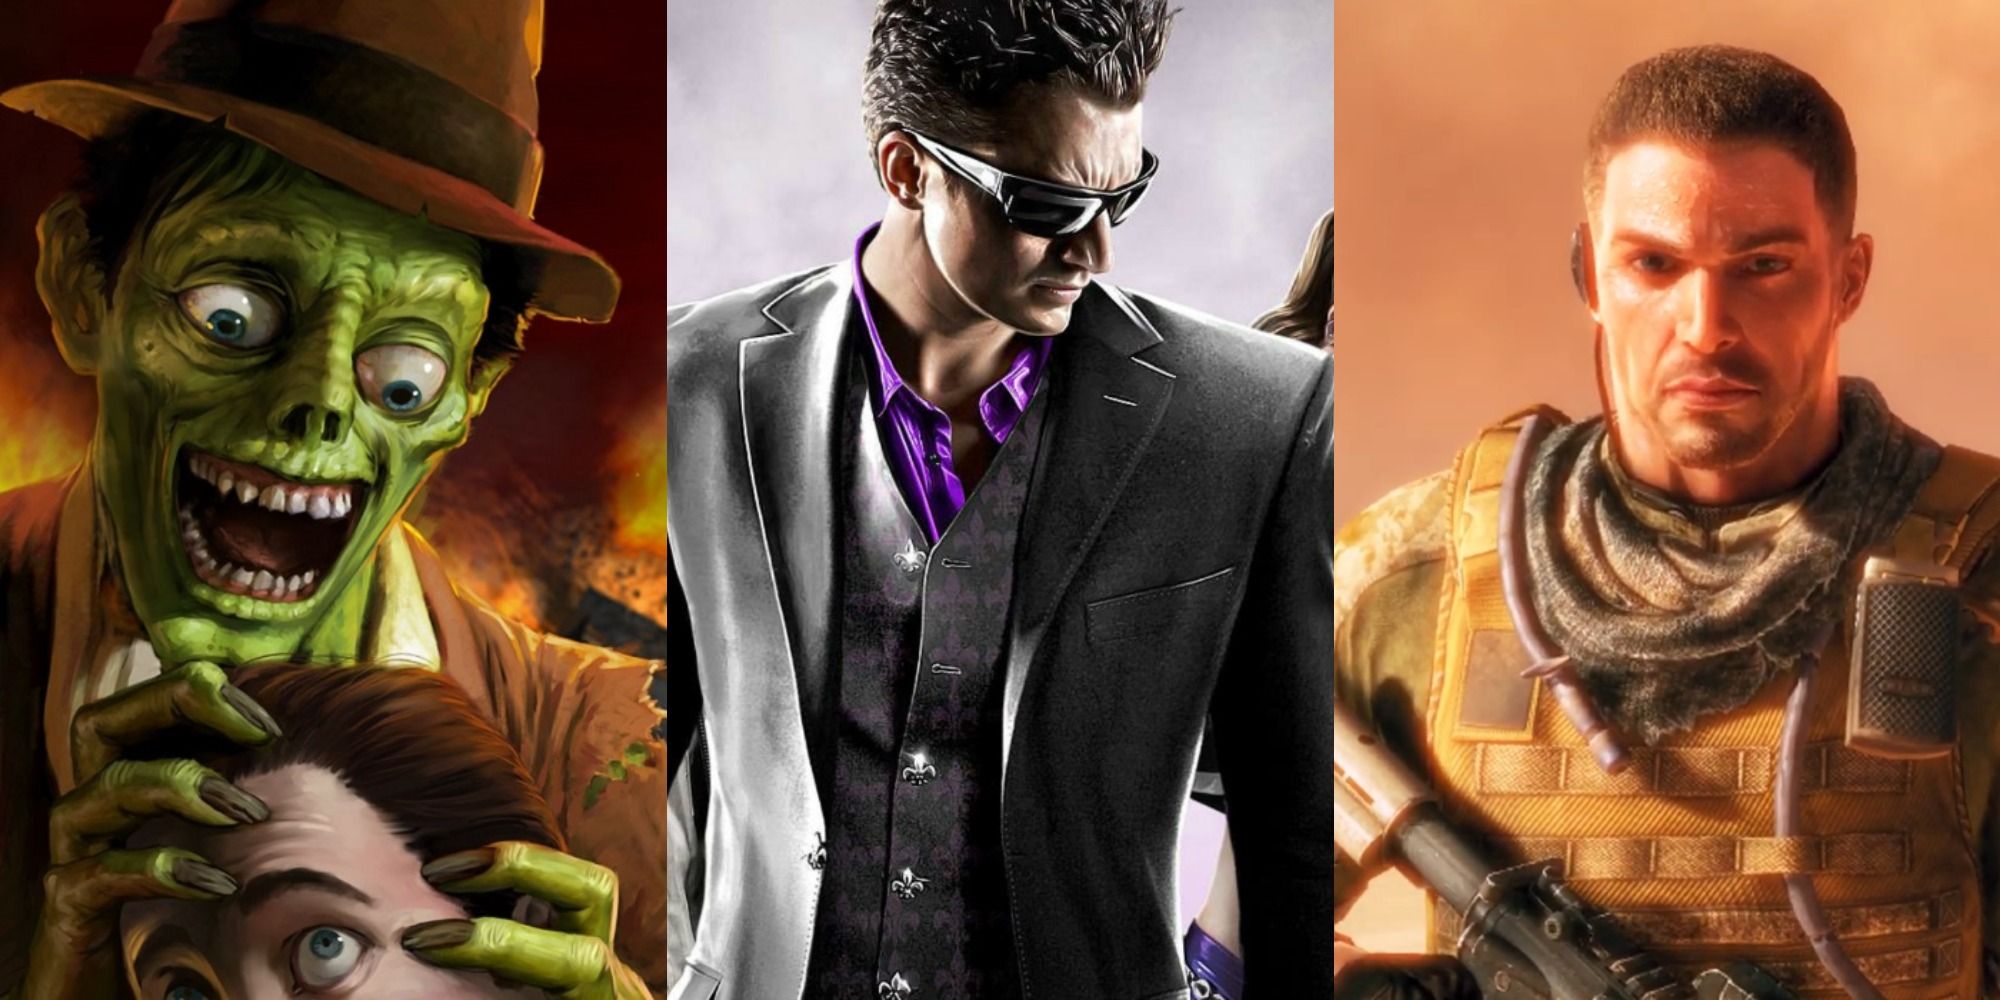 Split image of villains from Stubbs the Zombie, Saints Row, and Spec Ops games